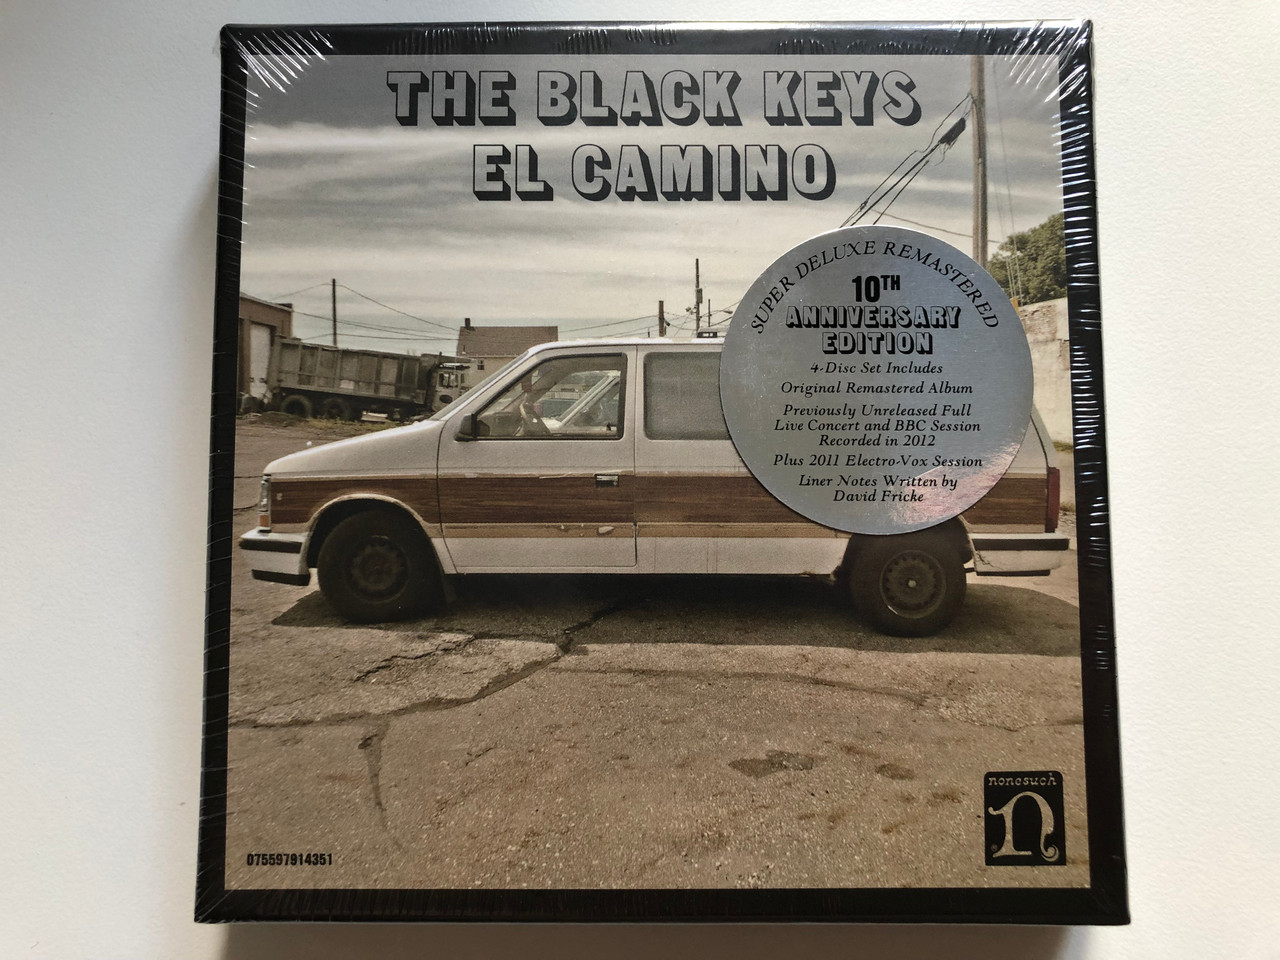 https://cdn11.bigcommerce.com/s-62bdpkt7pb/images/stencil/1280x1280/products/41334/226399/The_Black_Keys_El_Camino_Super_Deluxe_Remastered10th_Anniversary_Edition_4_Disc_Set_Includes_Original_Remastered_Album._Previously_Unreleased_Full_Live_Concert_and_BBC_Session_Nonesuch_1__21904.1651568898.JPG?c=2